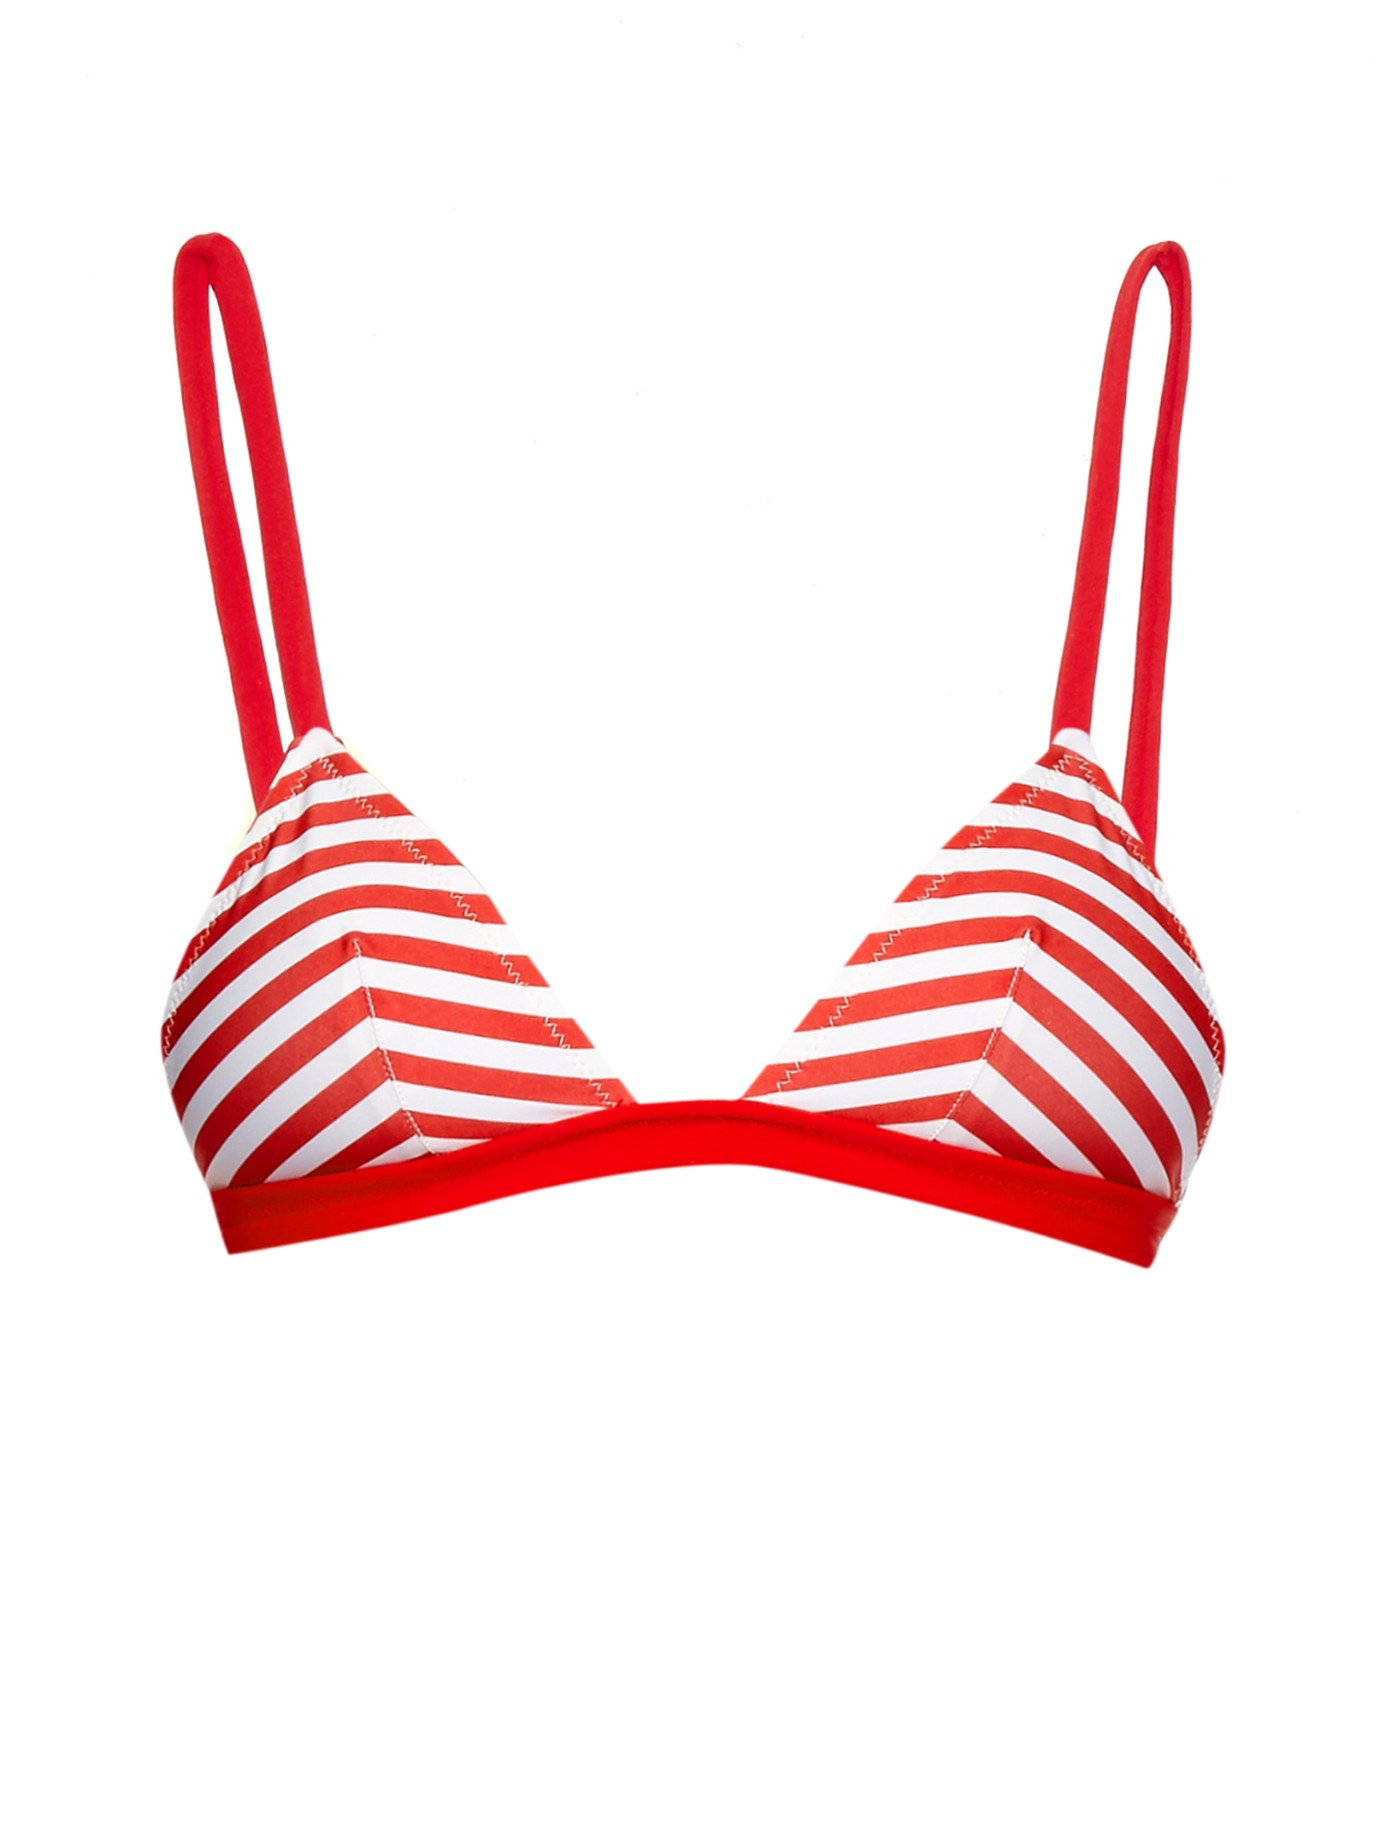 Solid & Striped The Morgan Bikini Top in Red White (Red) - Lyst